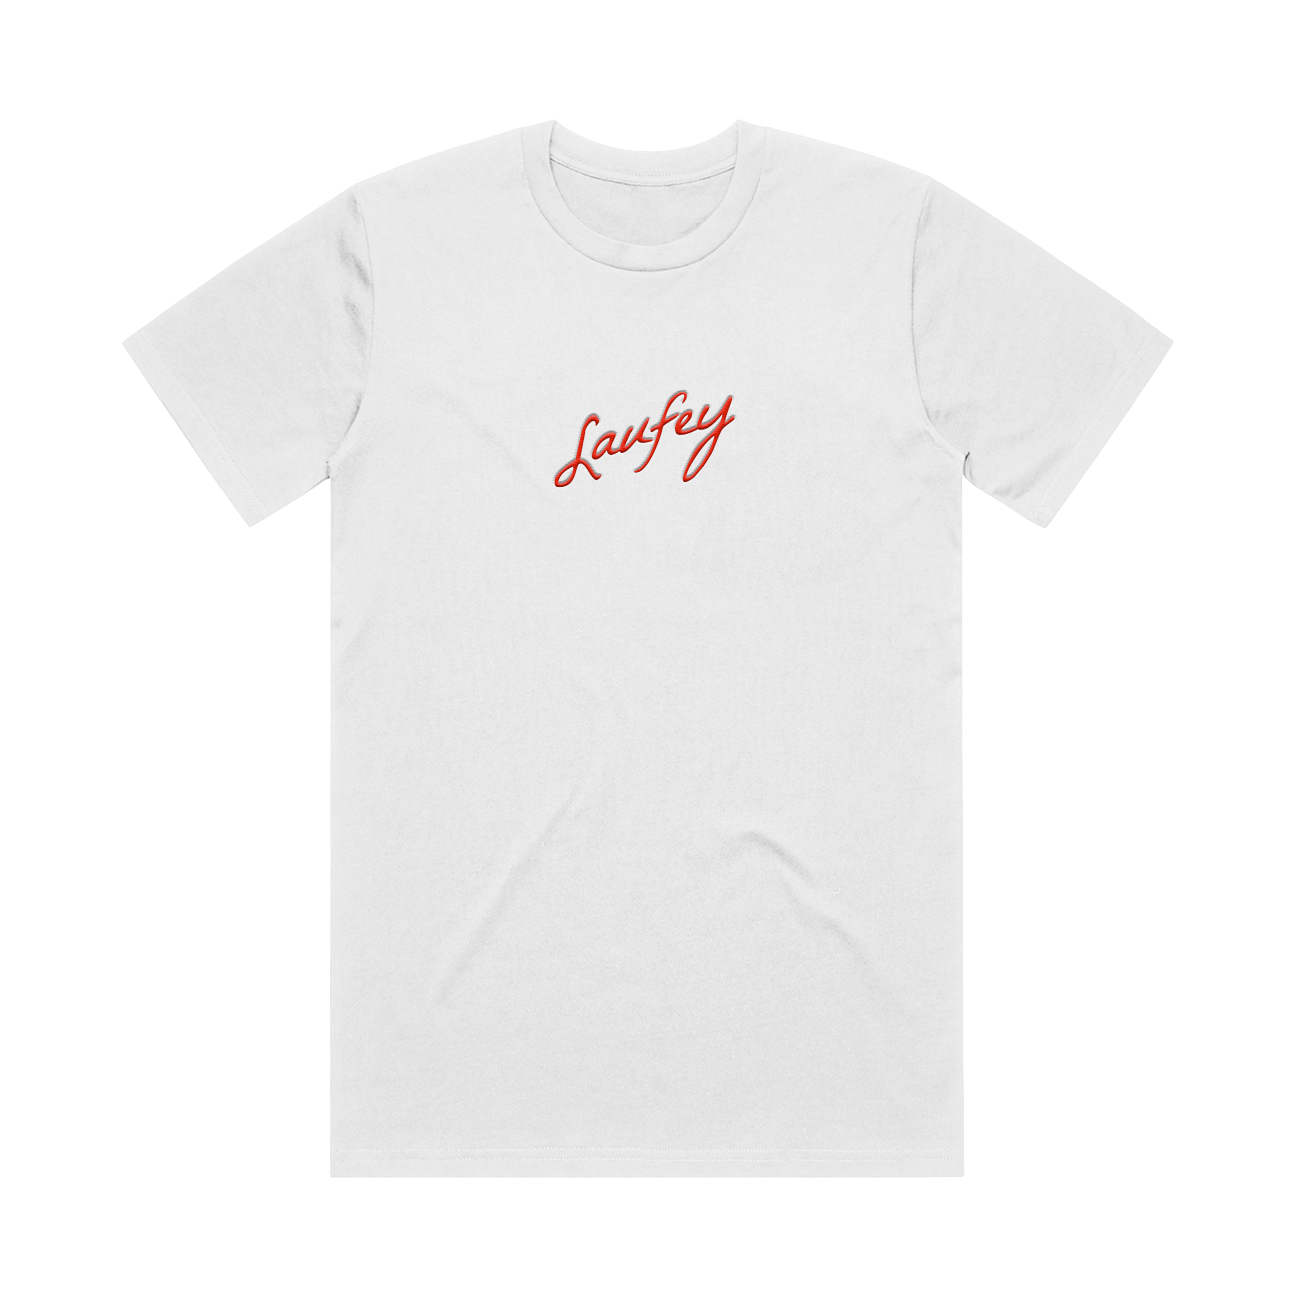 Embroidered Signature Tee - Red Thread - Laufey Merch